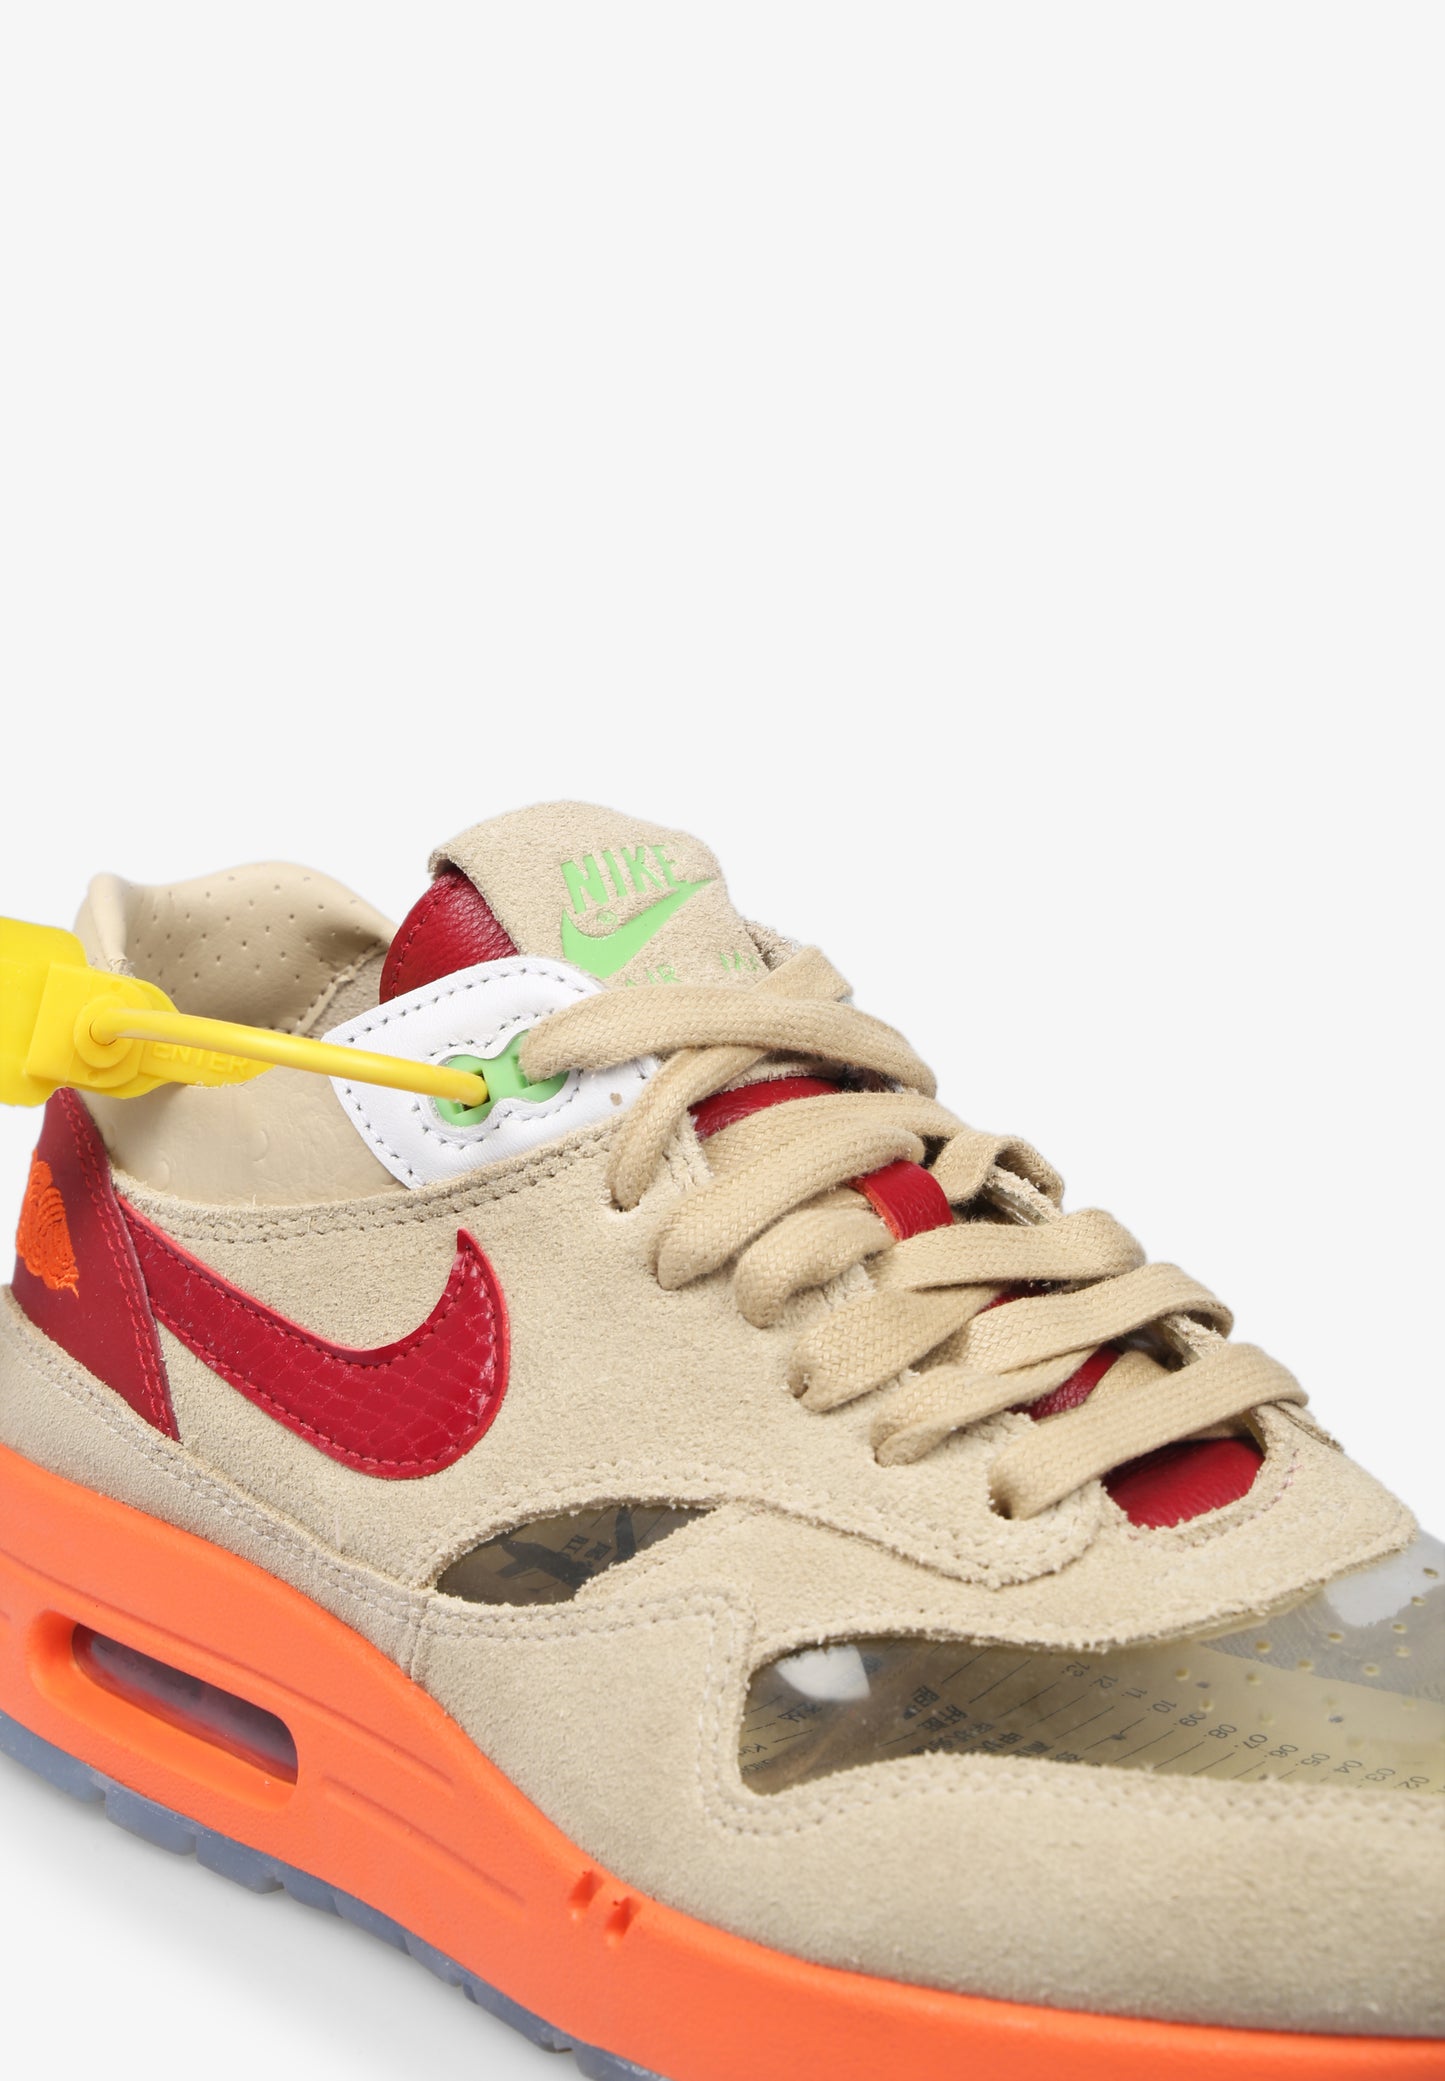 ARCHIVE SNEAKRS | SNEAKERS NIKE AIR MAX 1 CLOT KISS OF DEATH 2021 TALLA 42.5